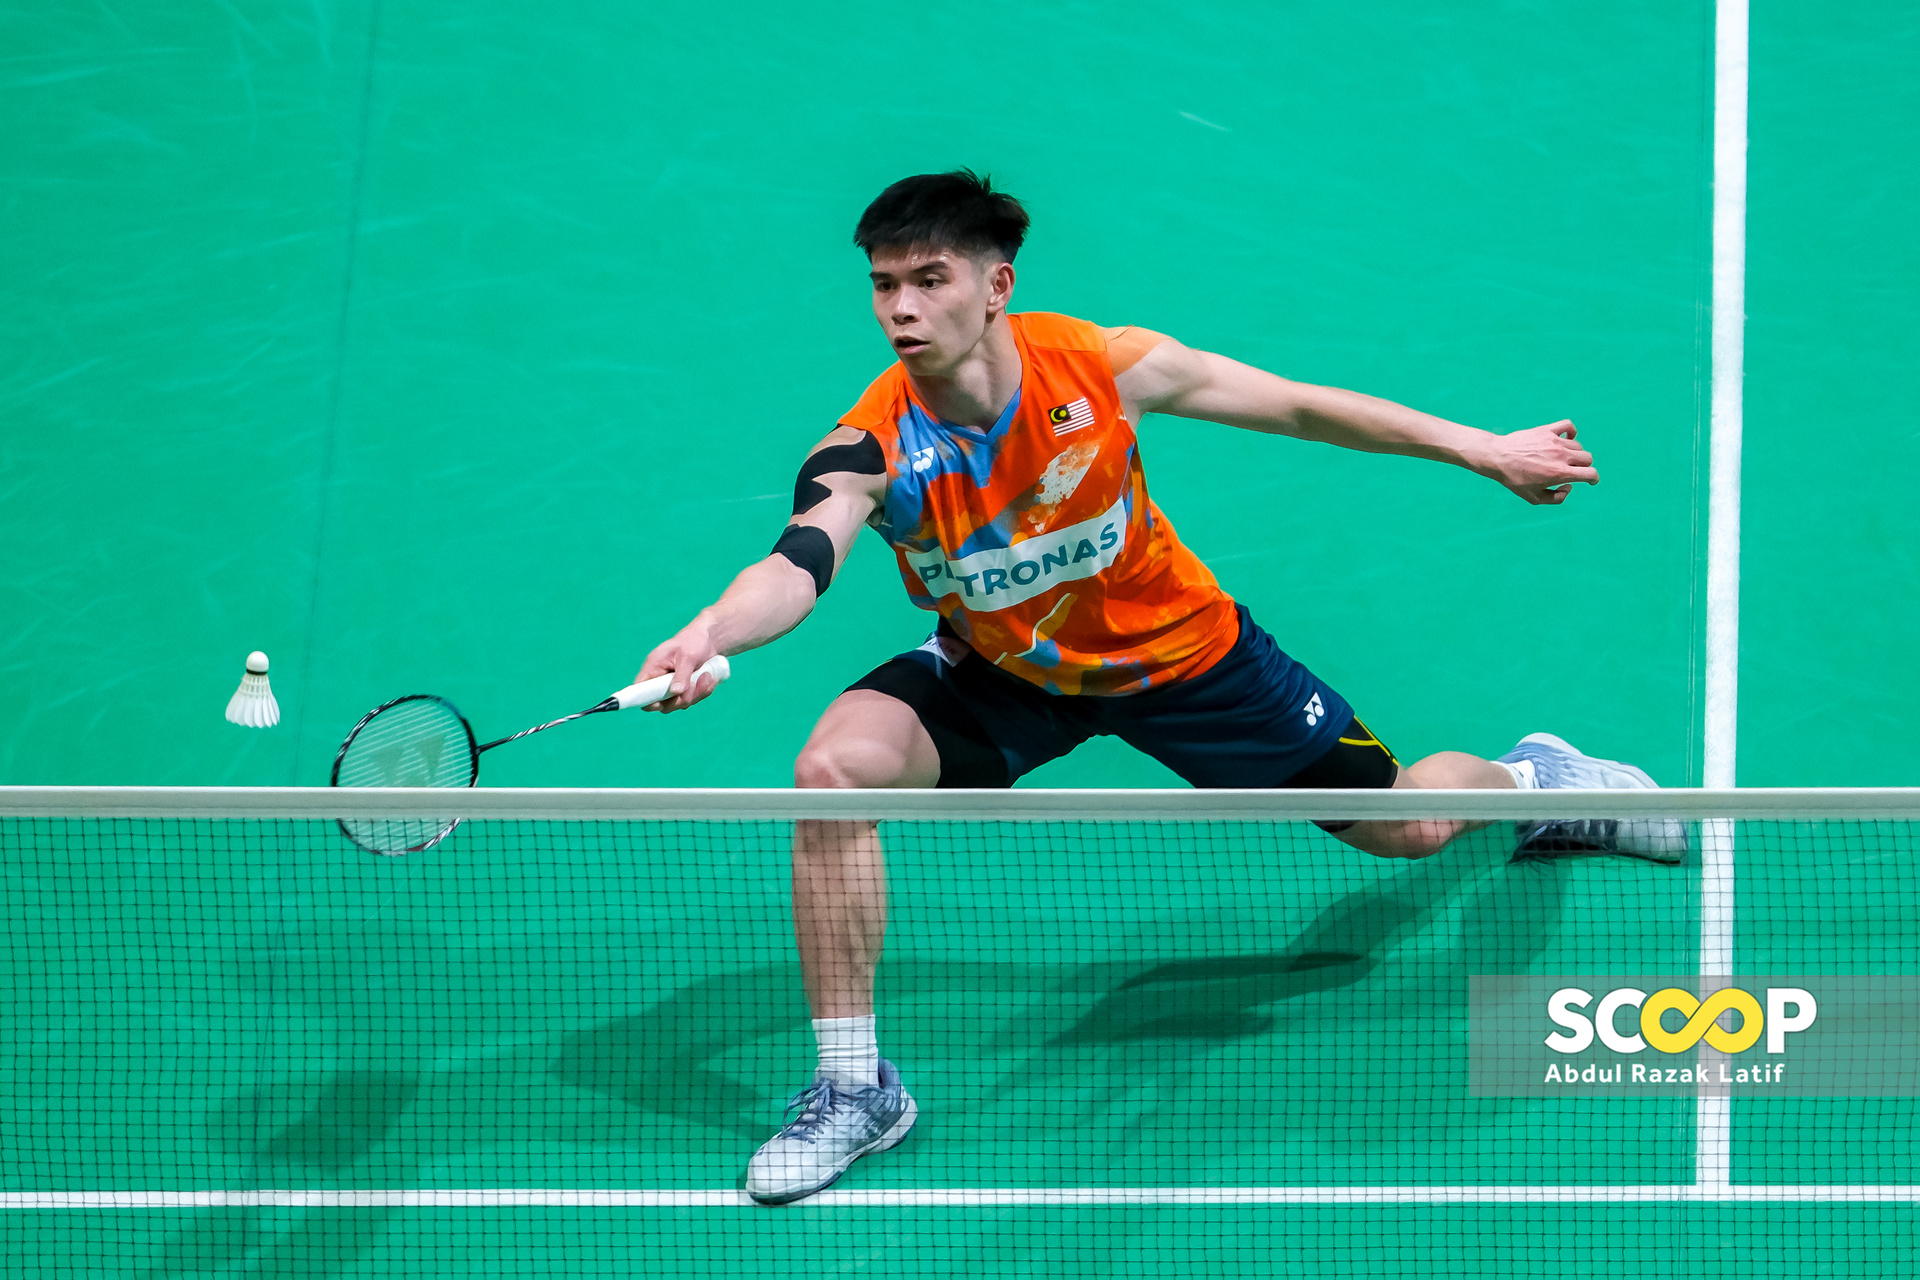 Singapore Open: Malaysia’s journey ends in quarters